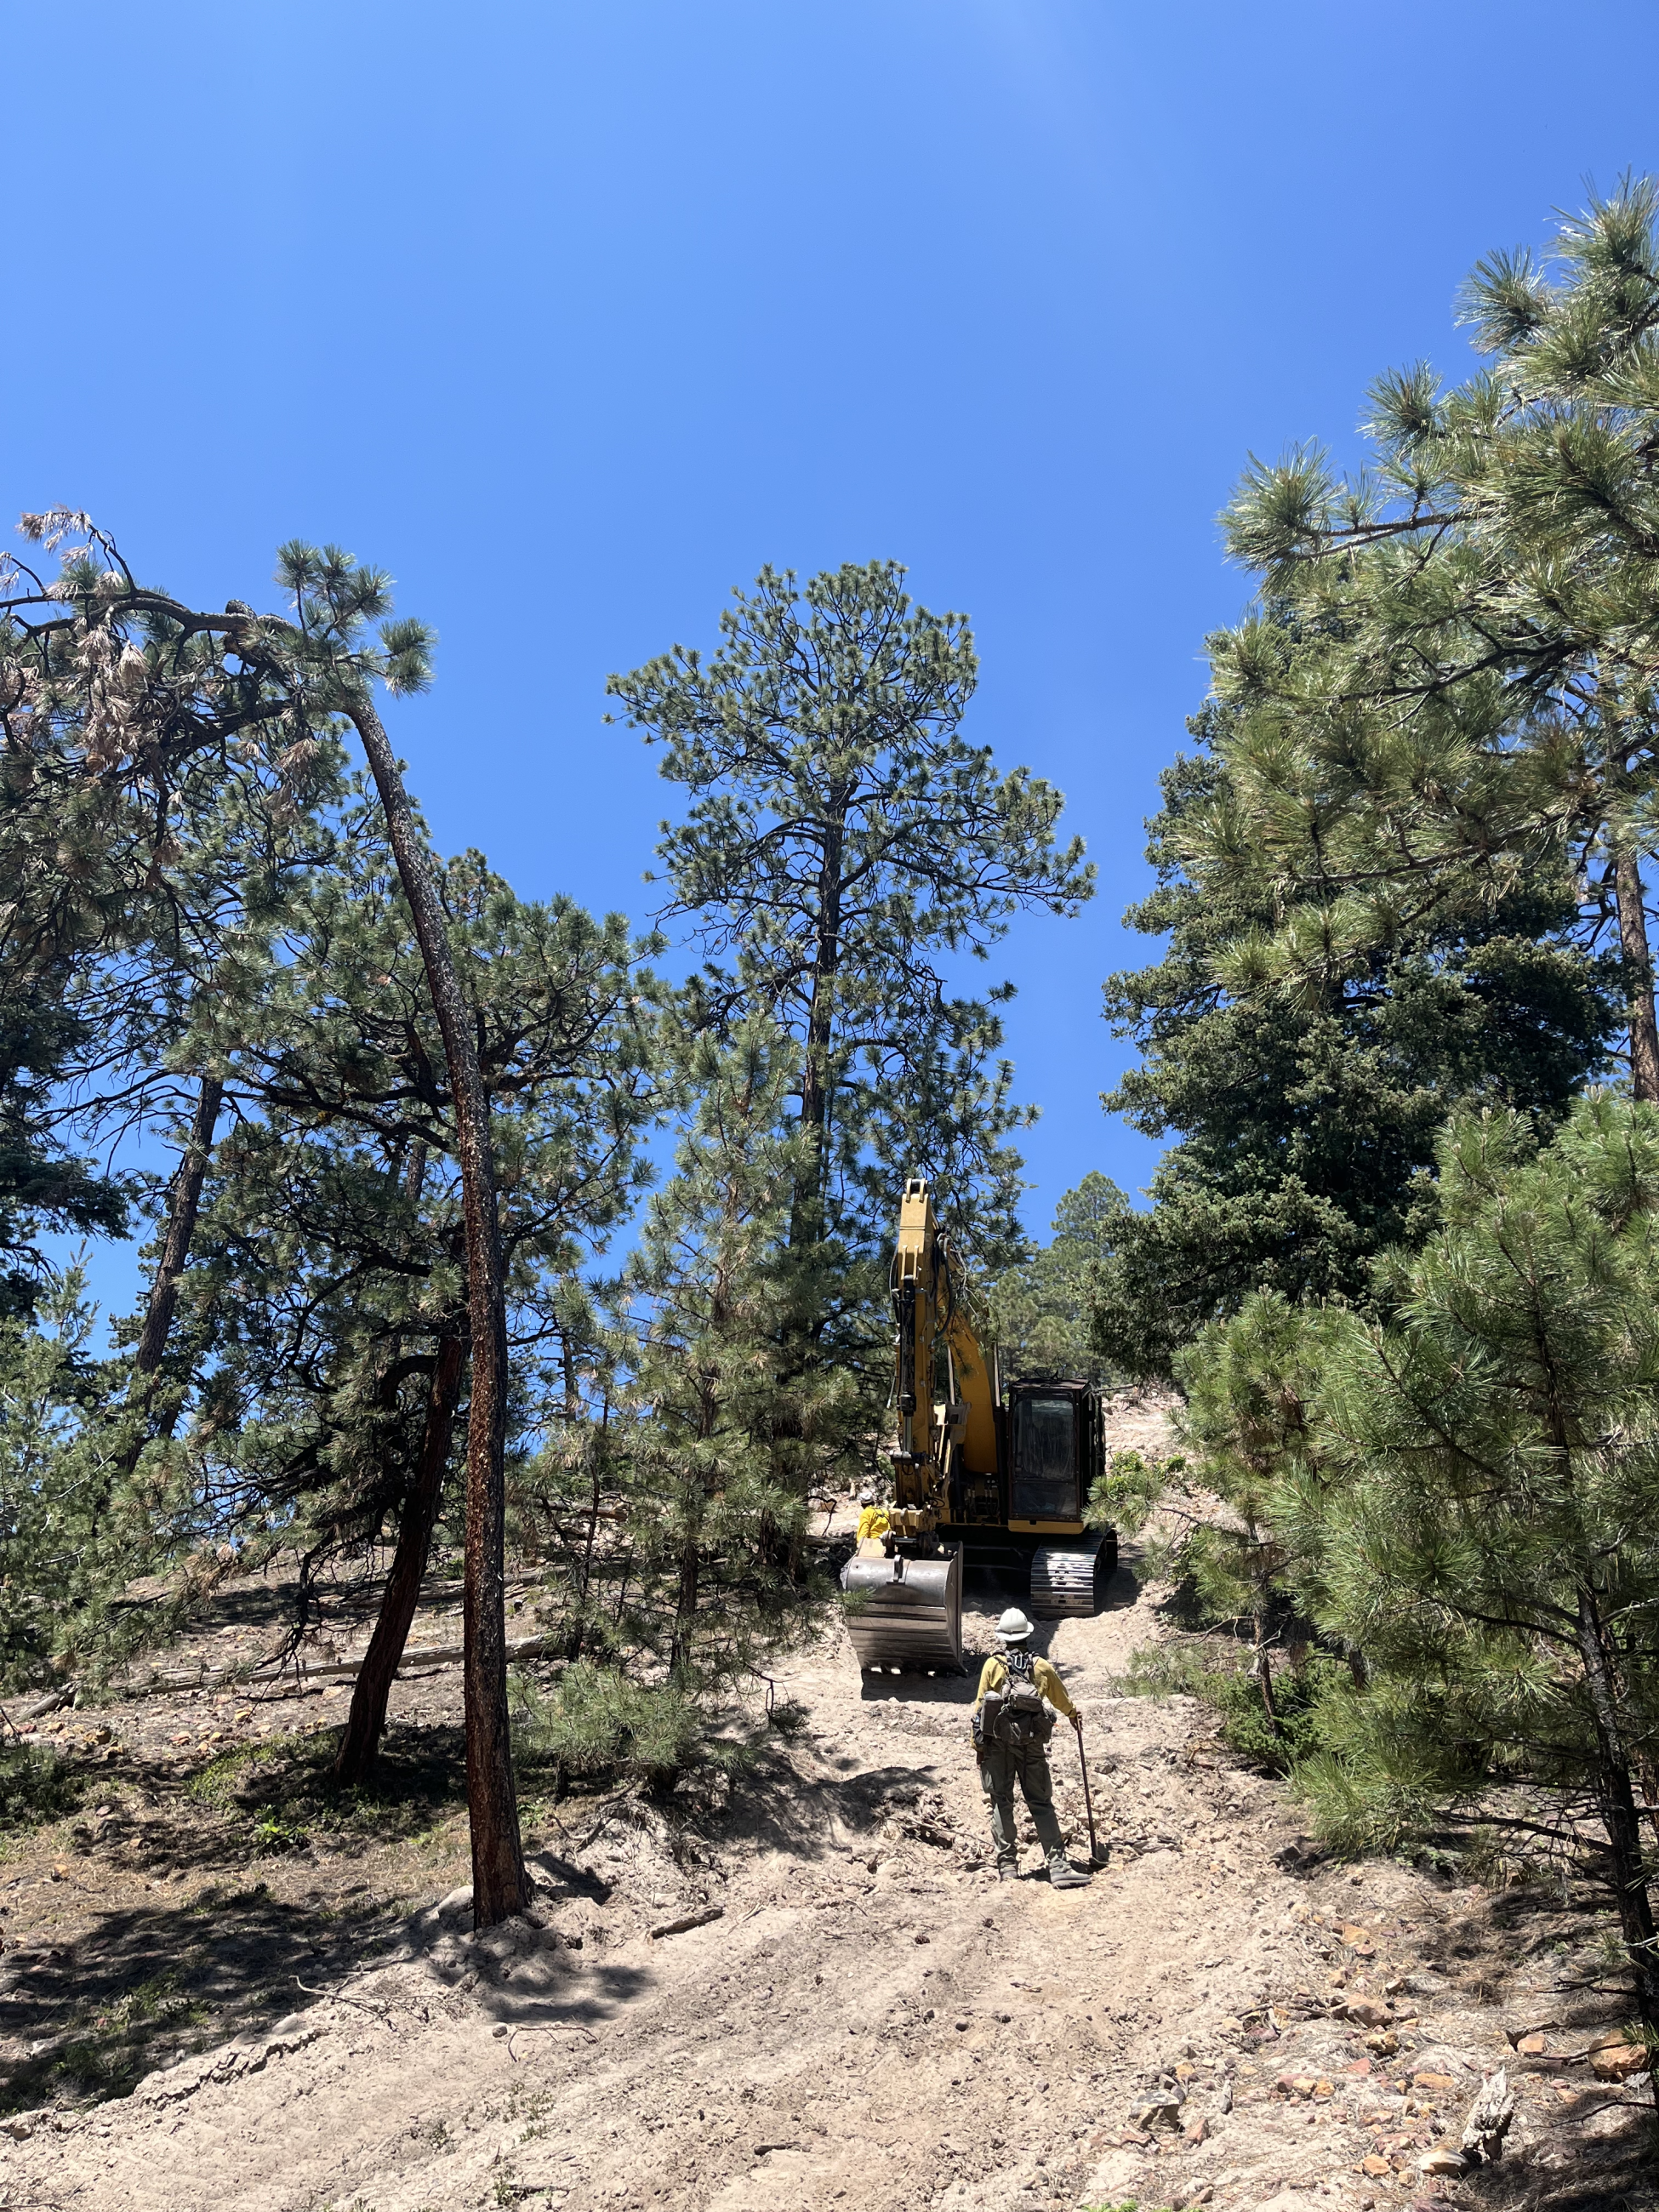 A wildland firefighter wearing a yellow shirt, green pants, and a white hard hat stands on a fireline in front of an excavator.